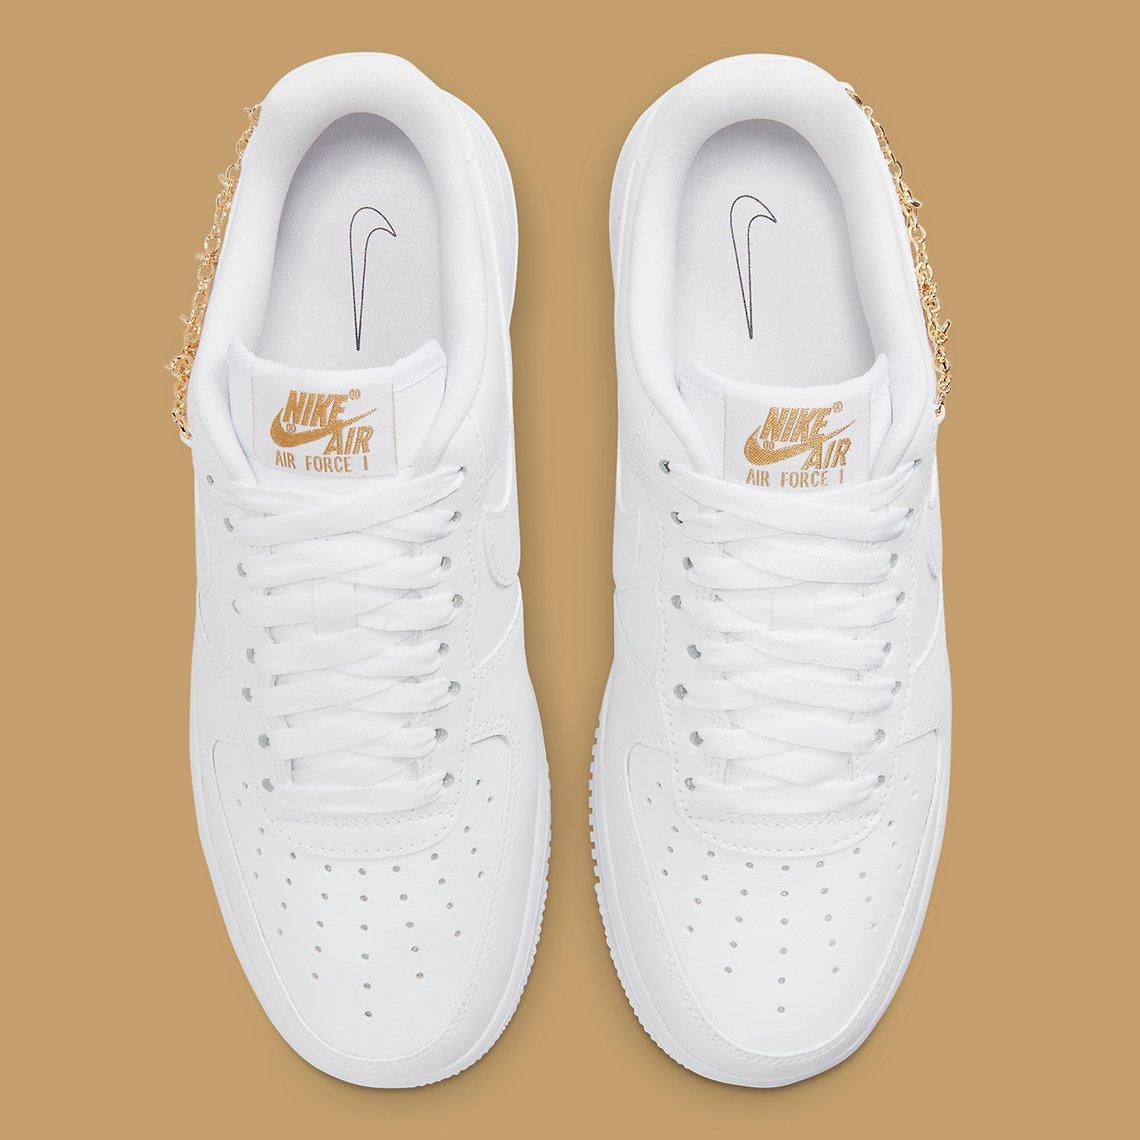 Nike Air Force 1 Low White Metallic Gold Gold Charms Dd1525 100 5